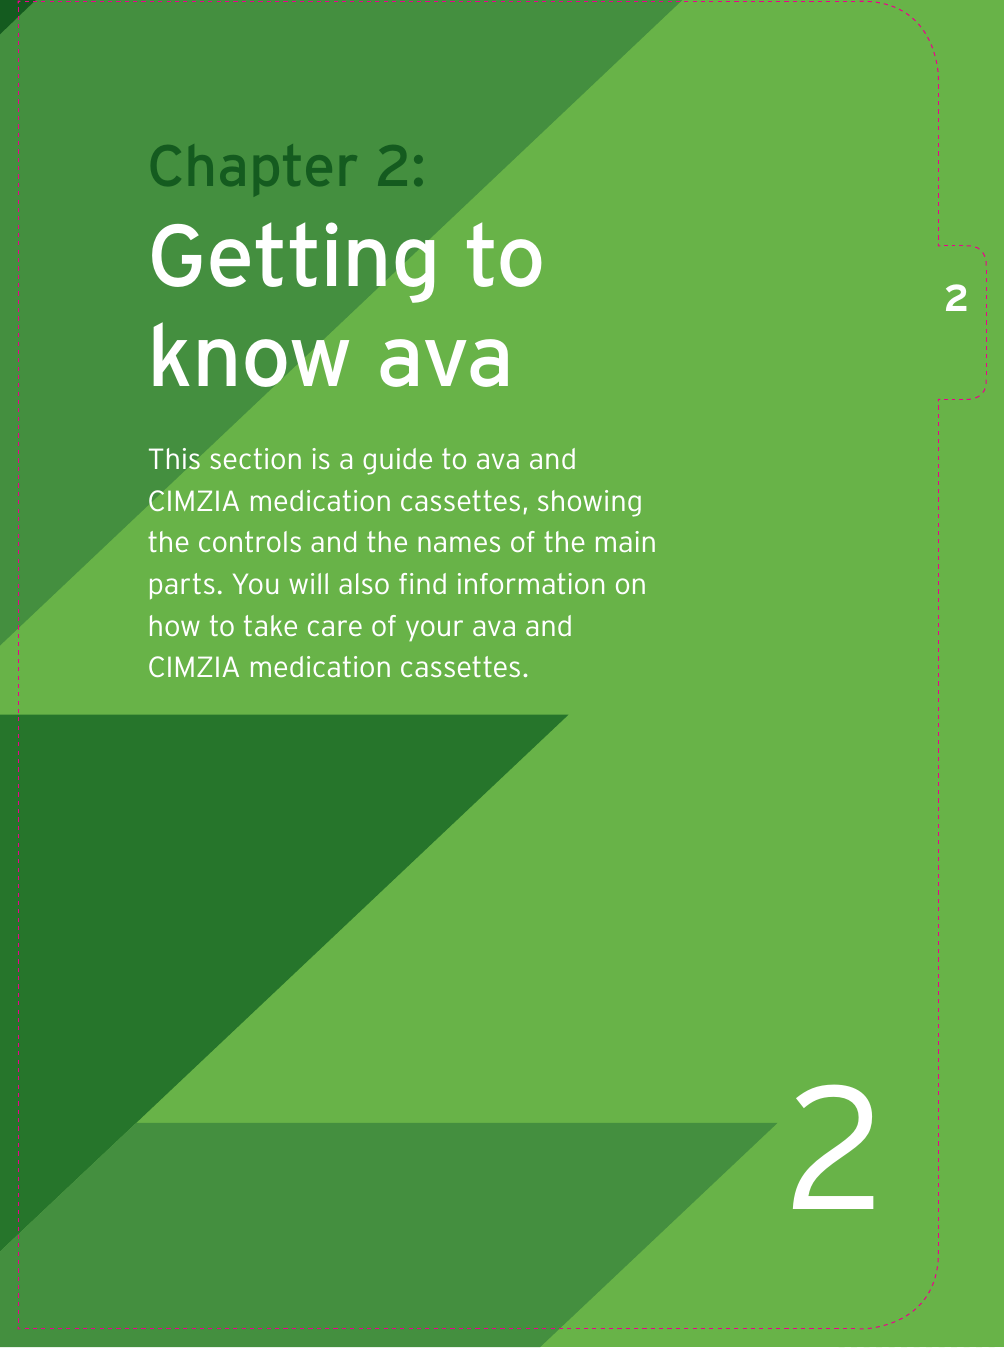 2Chapter 2: Getting to know avaThis section is a guide to ava and CIMZIA medication cassettes, showing the controls and the names of the main parts. You will also ﬁ nd information on how to take care of your ava and CIMZIA medication cassettes.2